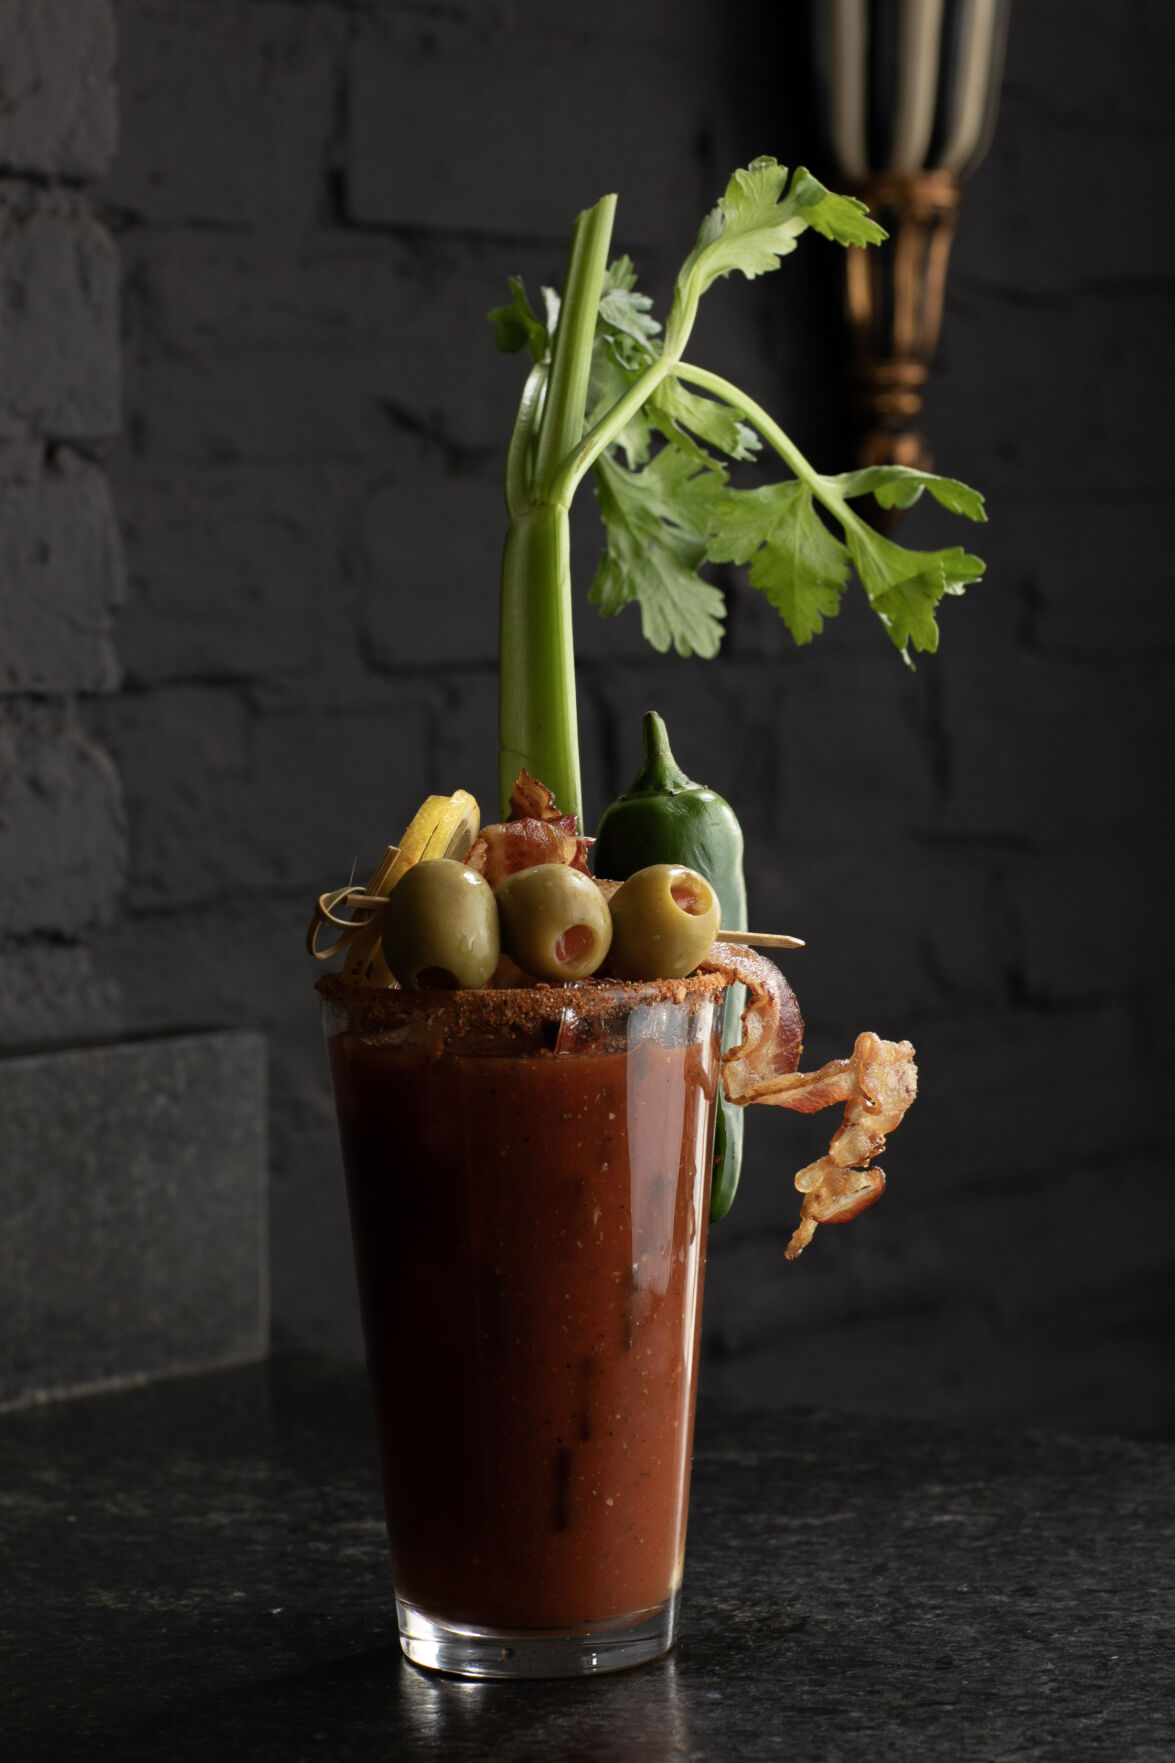 Bloody Mary Mix - Daily Appetite